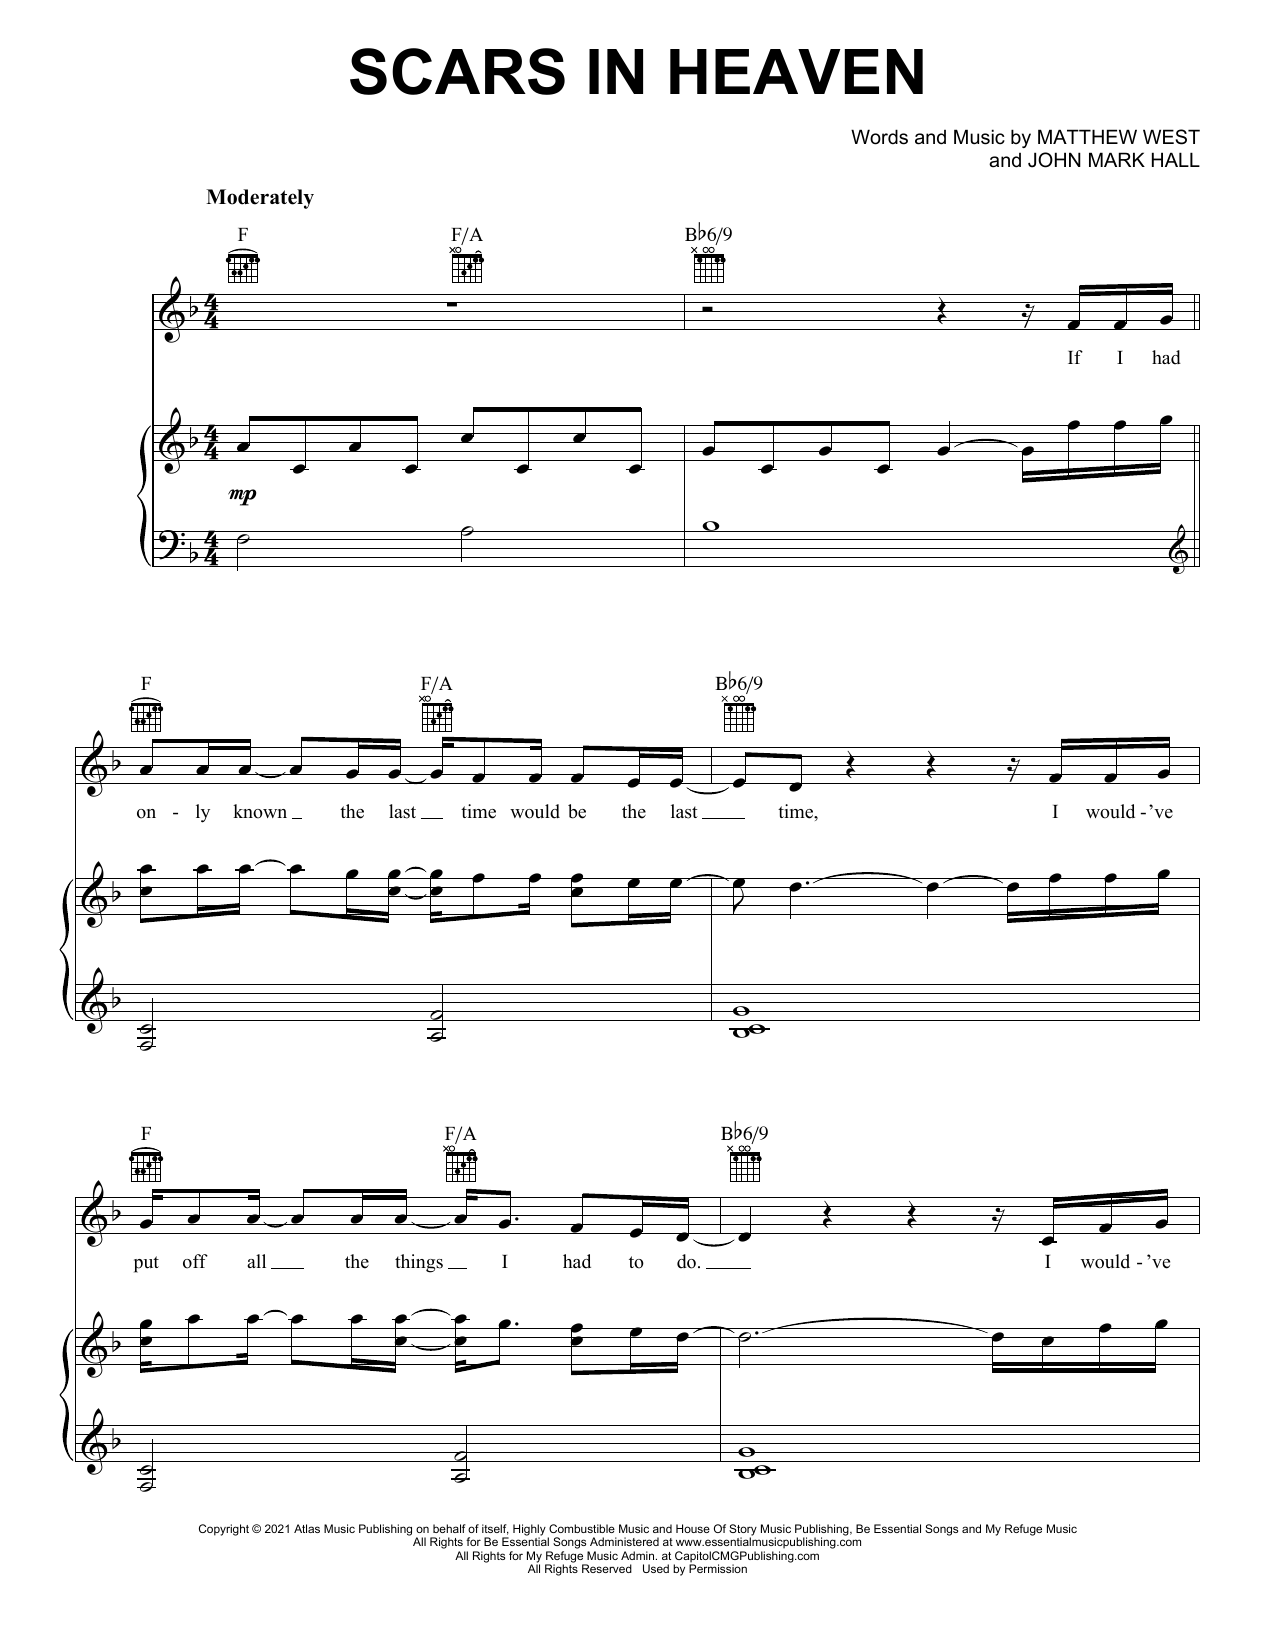 casting-crowns-scars-in-heaven-sheet-music-download-printable-pdf